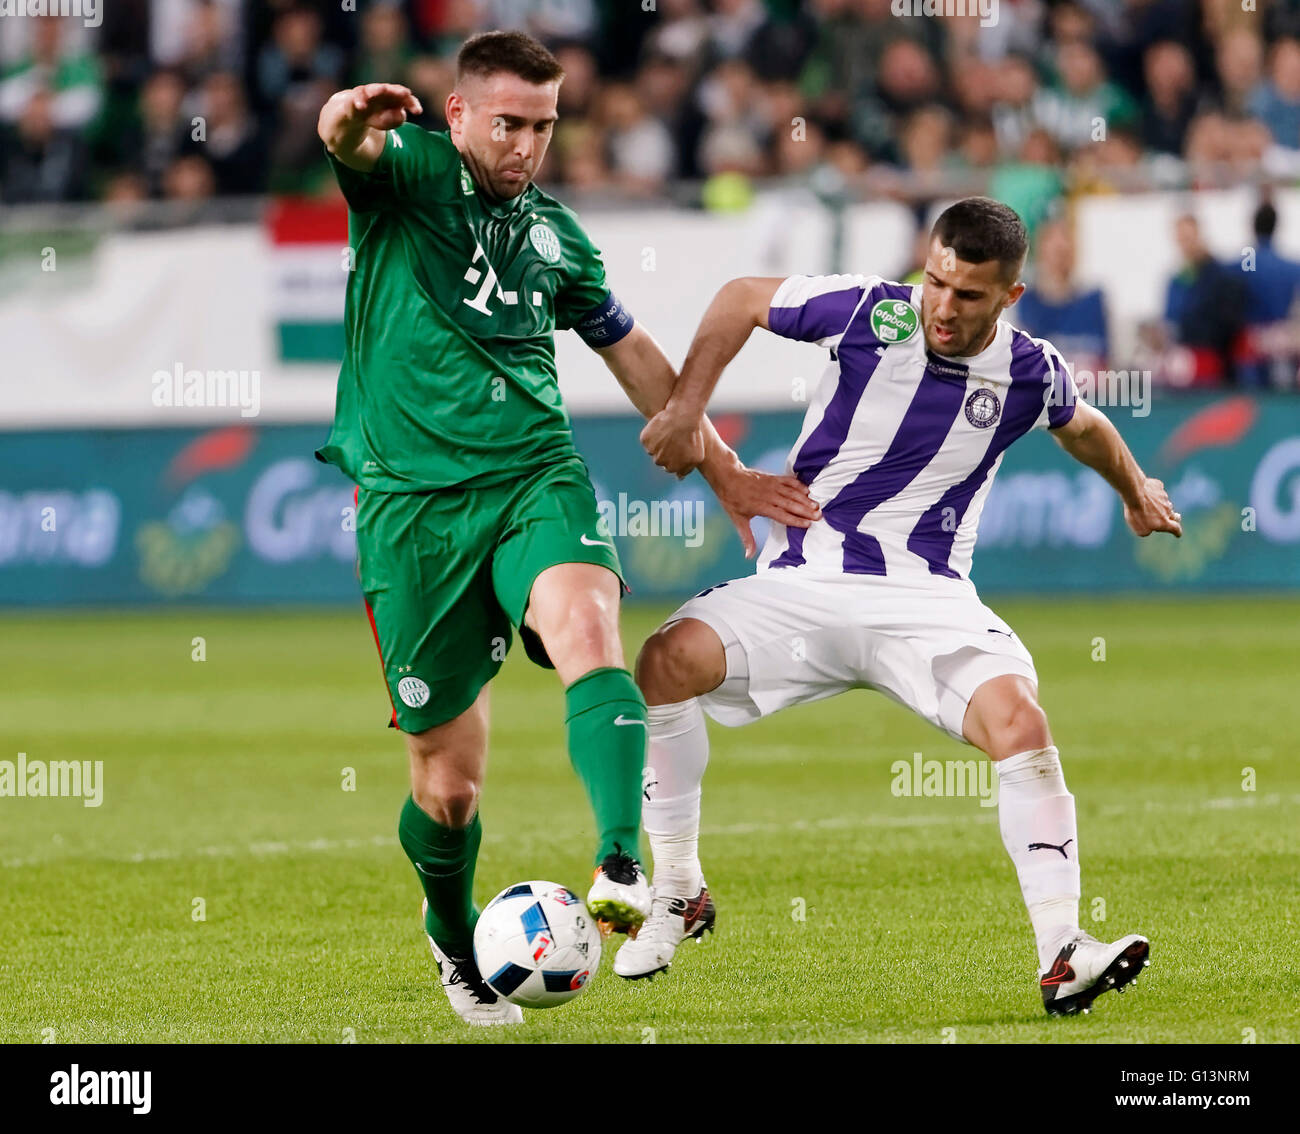 BUDAPEST, HUNGARY - MAY 7, 2016: Enis Bardhi (L) Of Ujpest FC